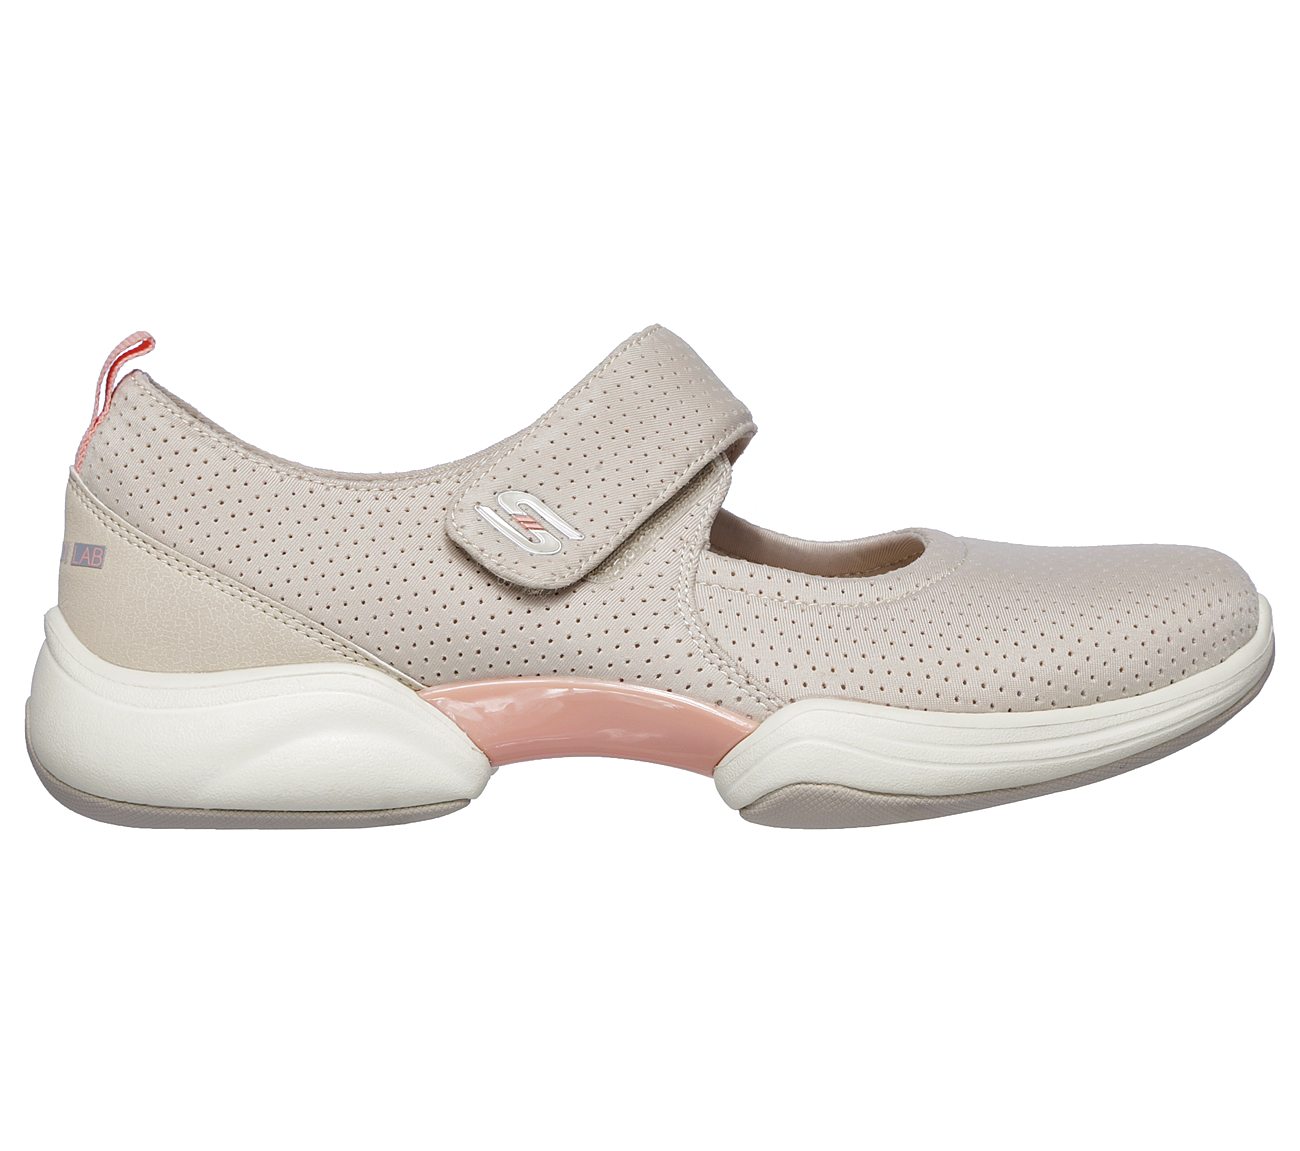 skechers baby doll shoes